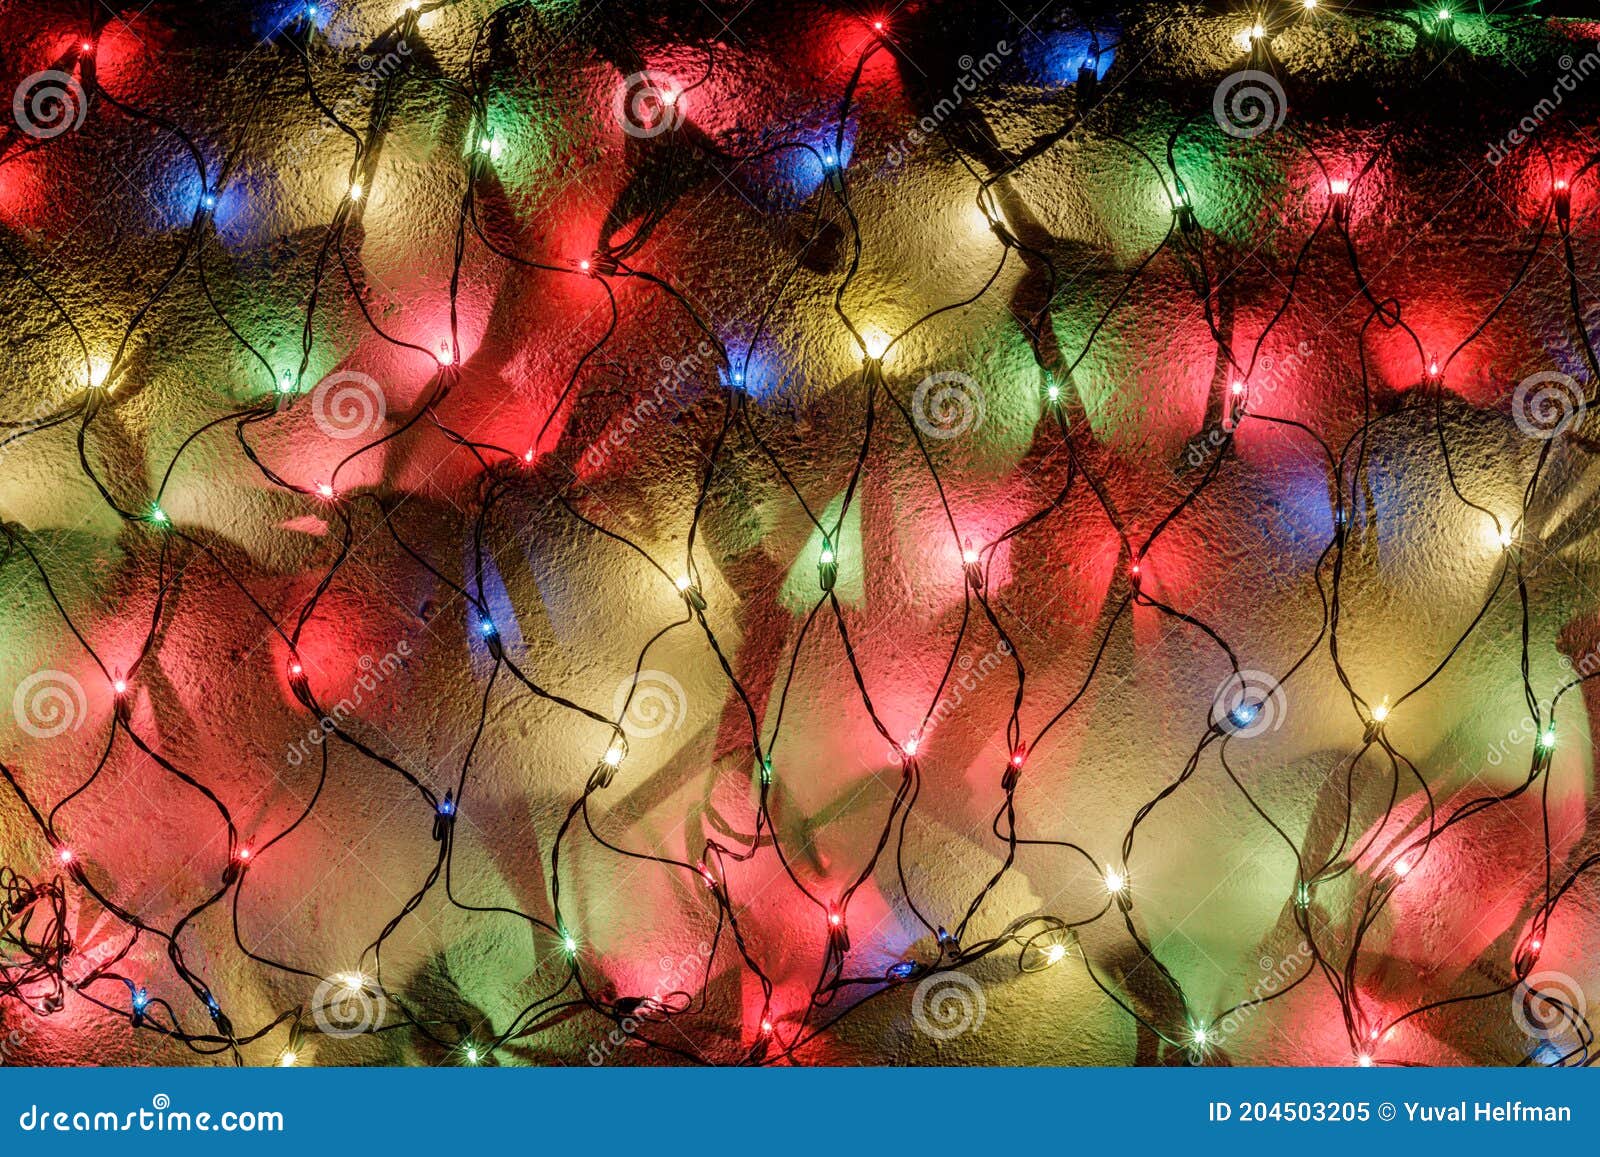 Multi Color Led Net Lights Decorating Wall At Christmas Stock Image Image Of Electric Celebration 204503205